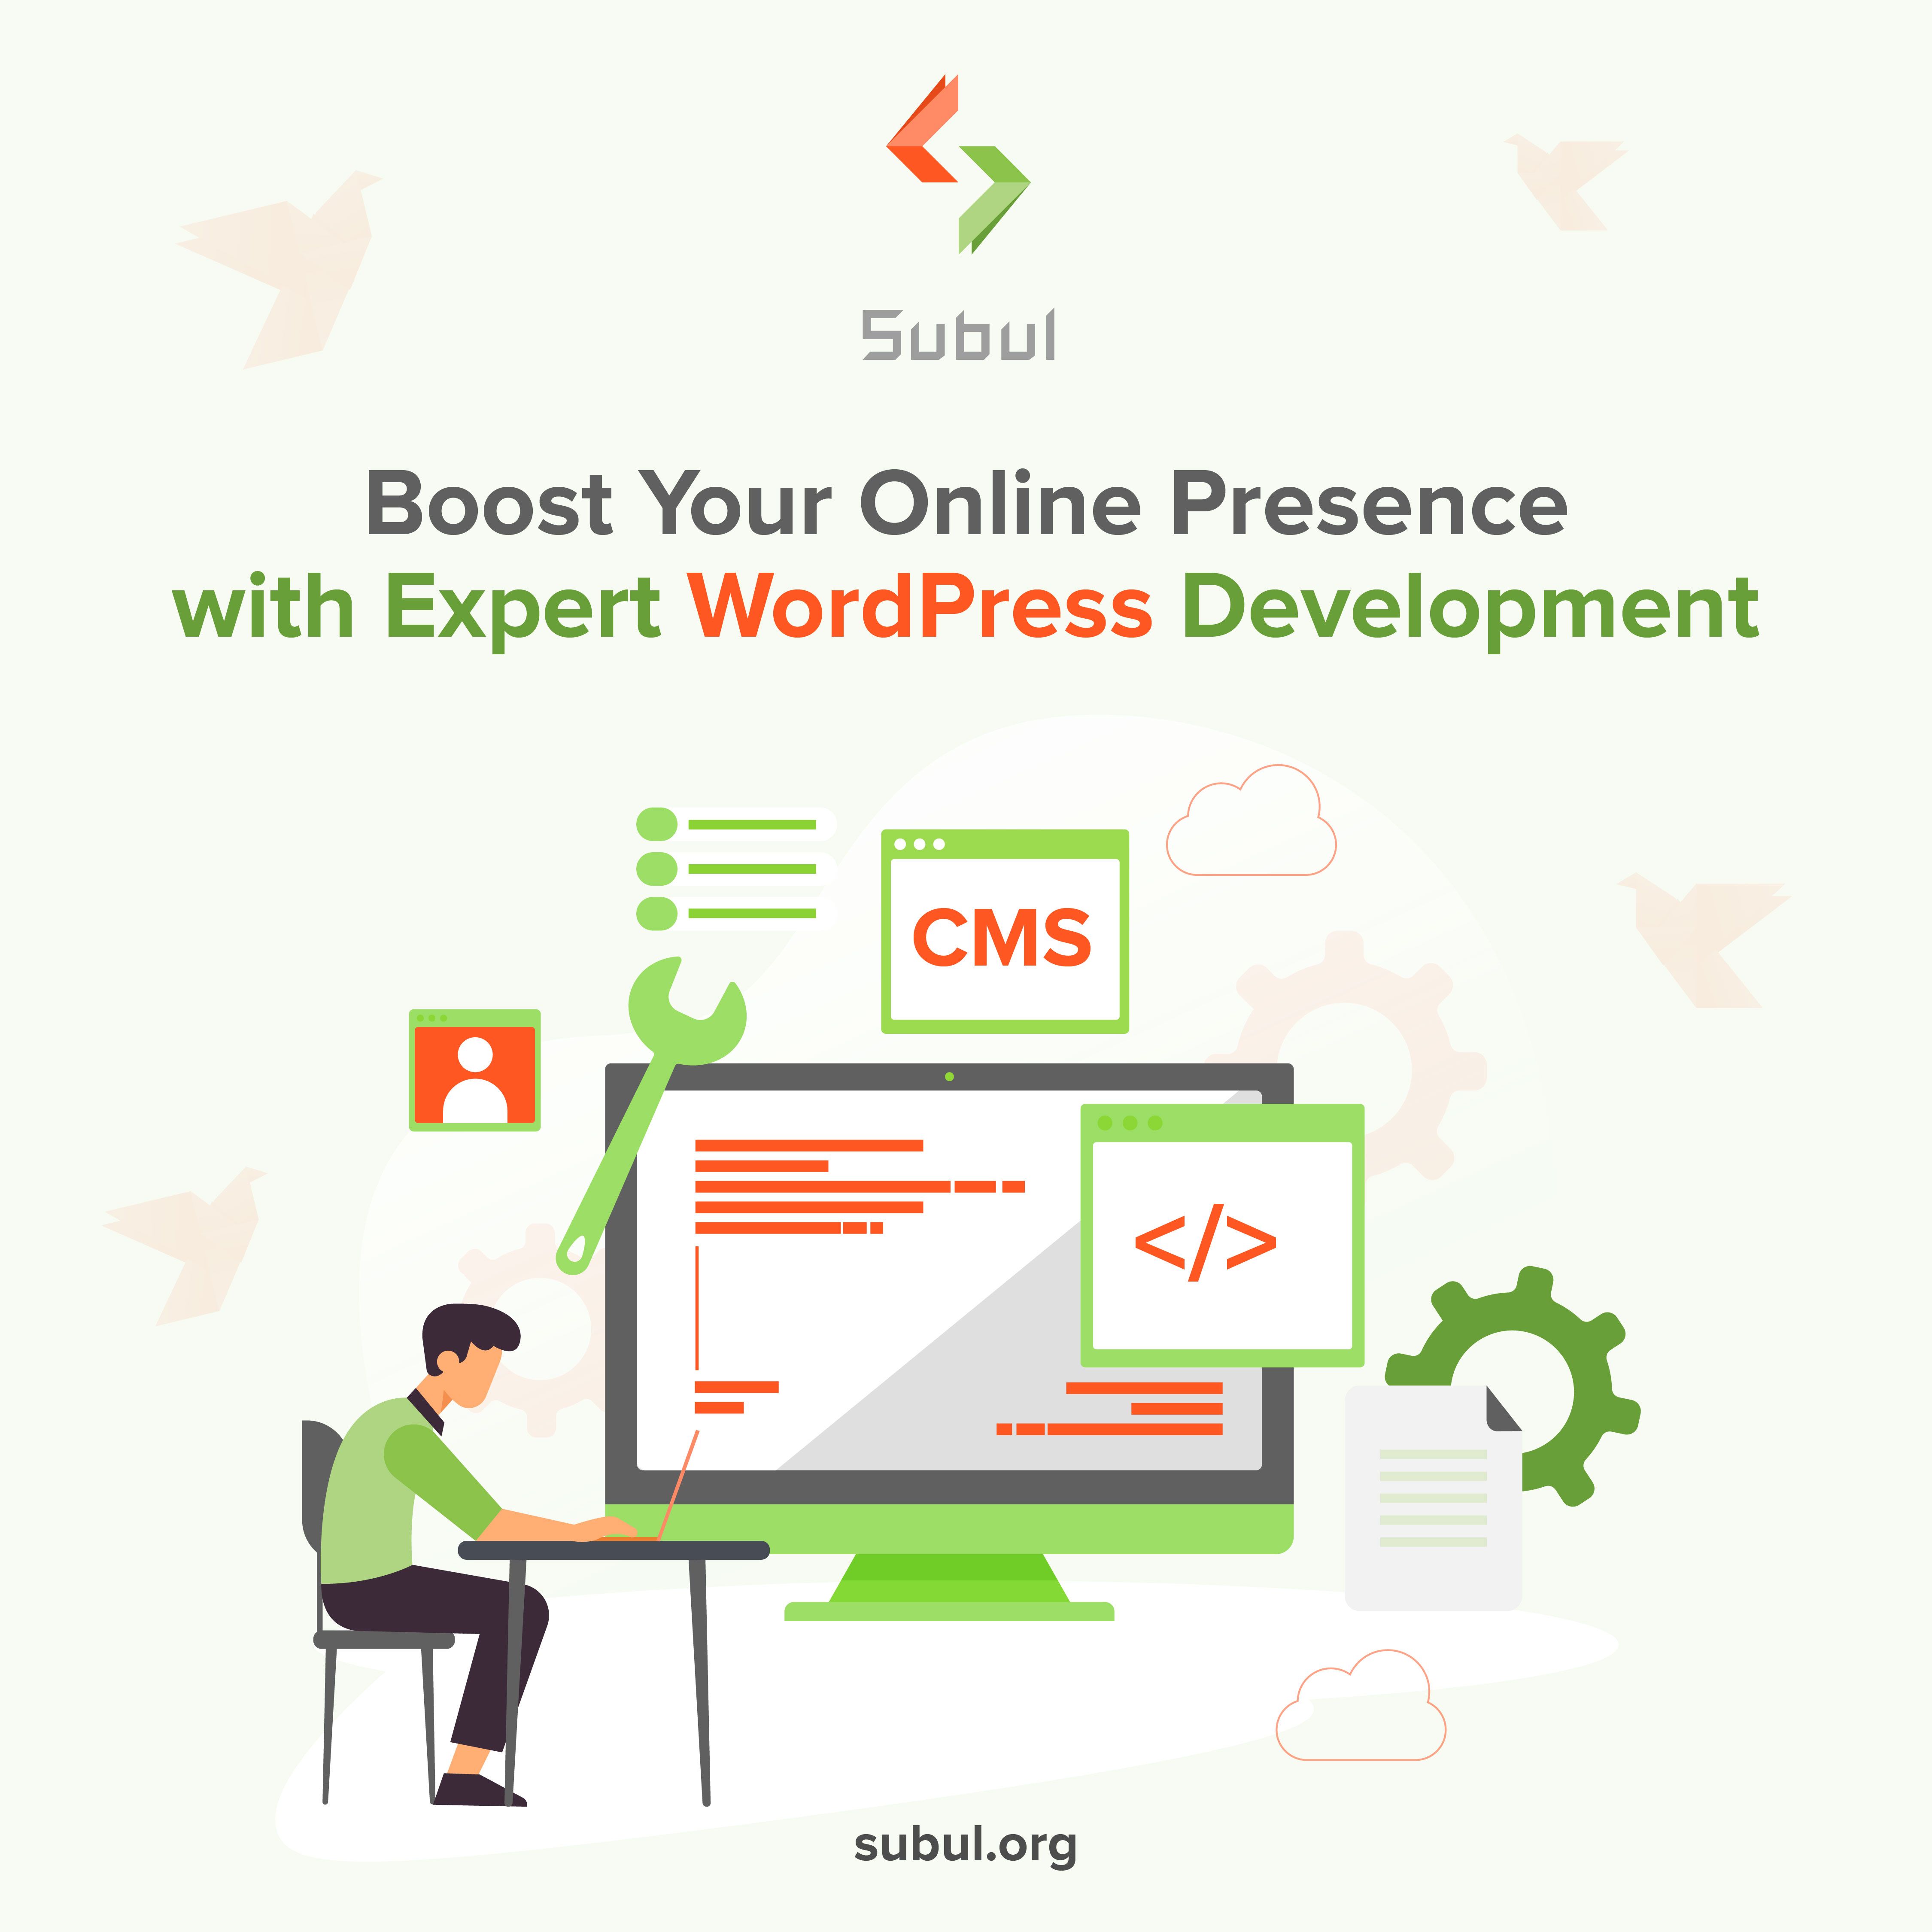 Boost Your Online Presence with a Leading WordPress Development Agency